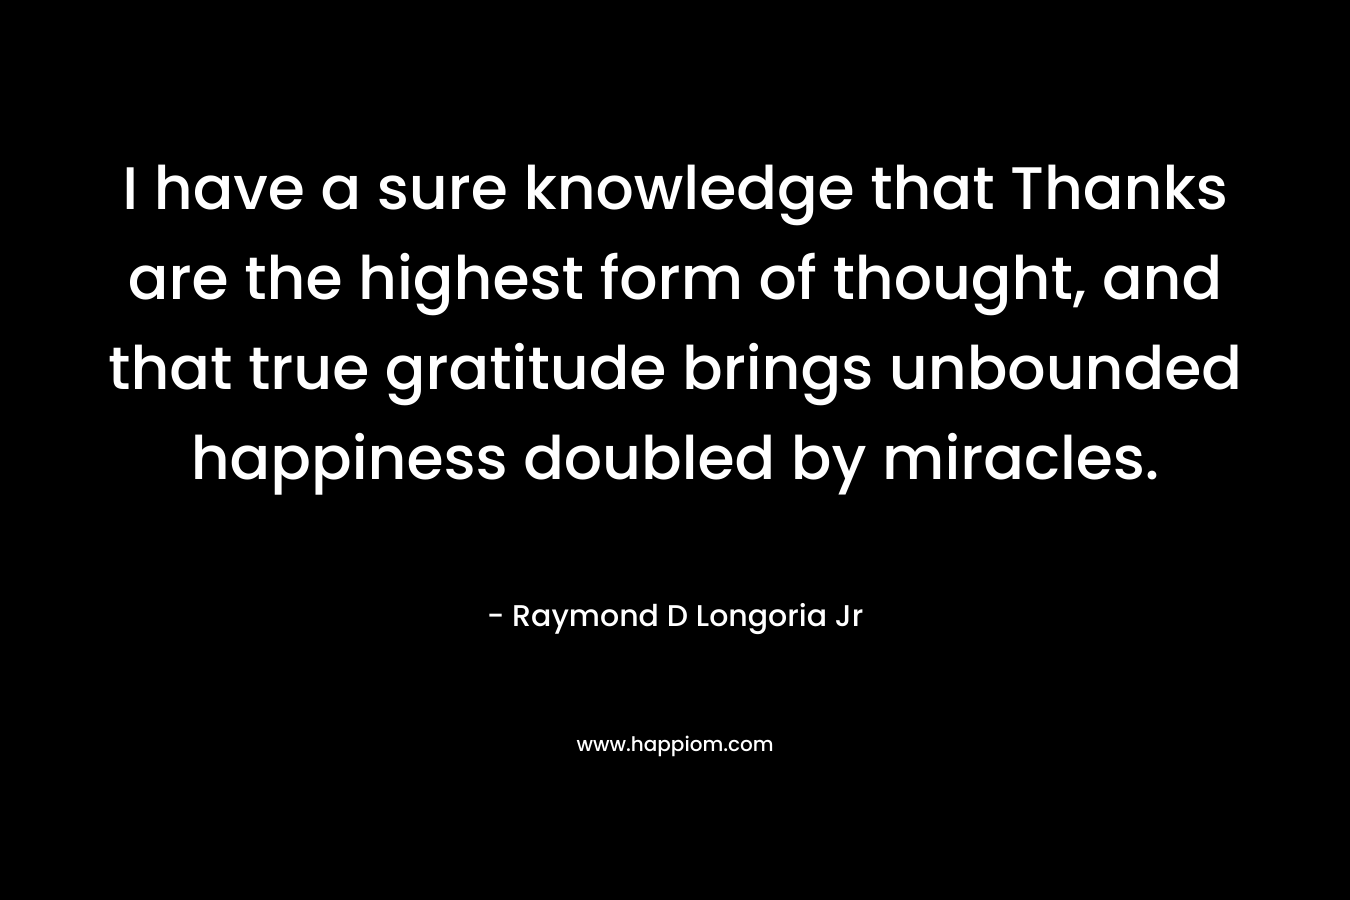 I have a sure knowledge that Thanks are the highest form of thought, and that true gratitude brings unbounded happiness doubled by miracles. – Raymond D Longoria Jr